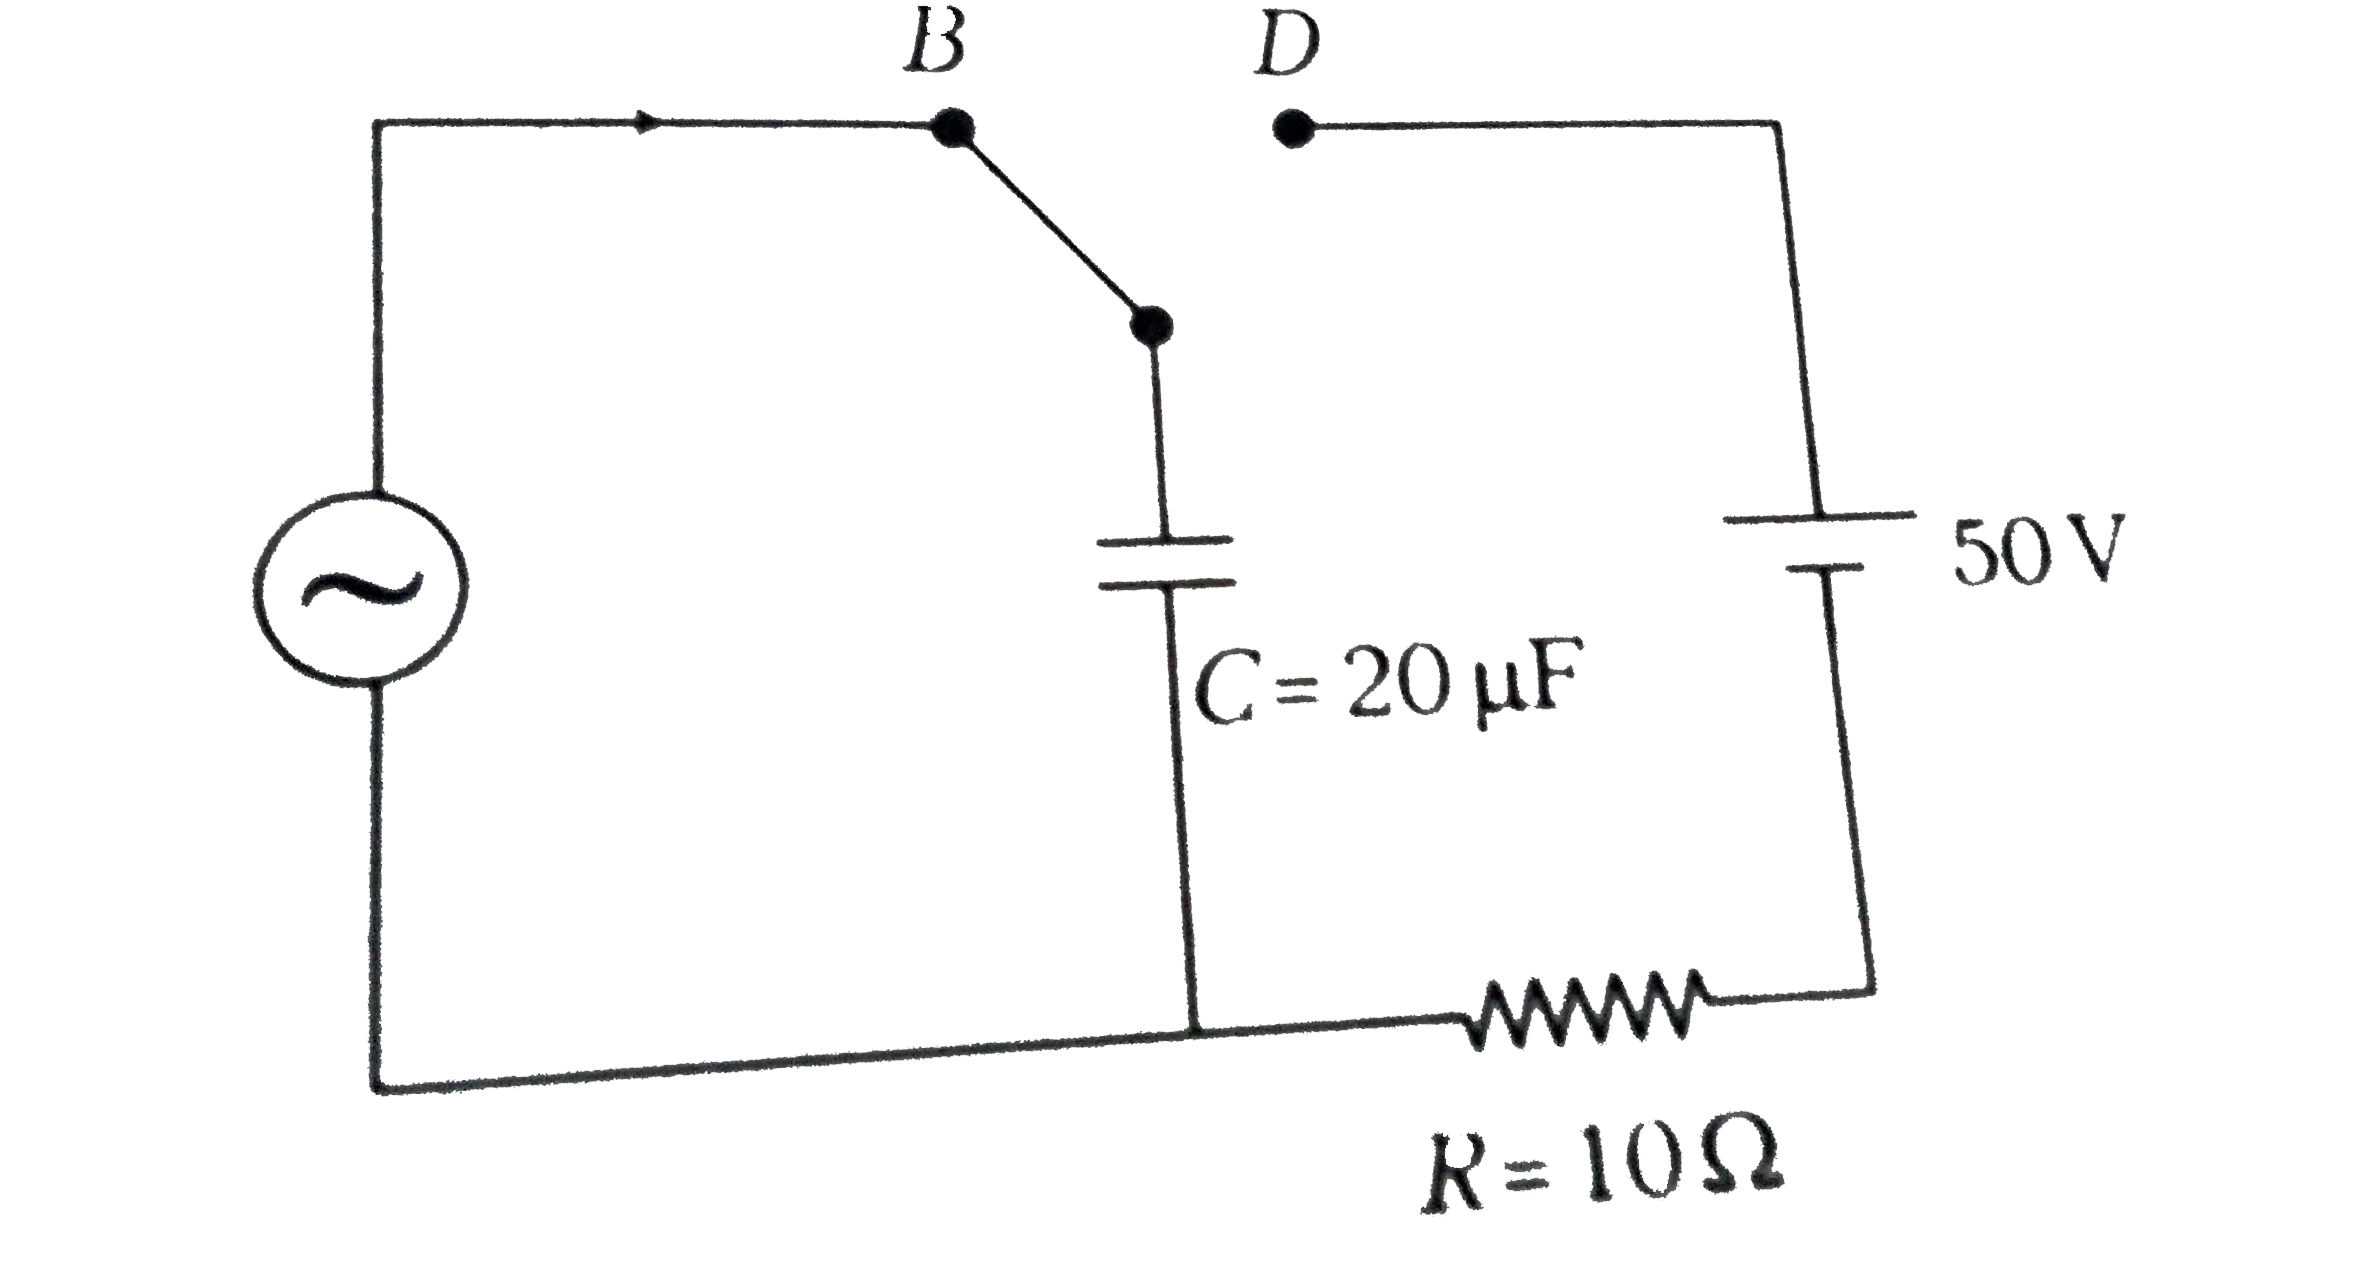 At time t = 0 , terminal A in the circuit shown in the figure is connected to B by a key and alternating current I(t) = underset(o)(I)cos(omegat), with underset(o)(I) = 1 A and omega = 500 rad s^(-1) starts flowing in it with the initial direction shown in the figure . At t = 7pi/6omega , the keys is switched from B to D . Now onwards only A and D are connected . A total charge Q flows from the battery to charge the capacitor fully. If C = 20 mu , R = 10 Omega and the battery is deal with emf of 50 V , identify the correct statement(s).